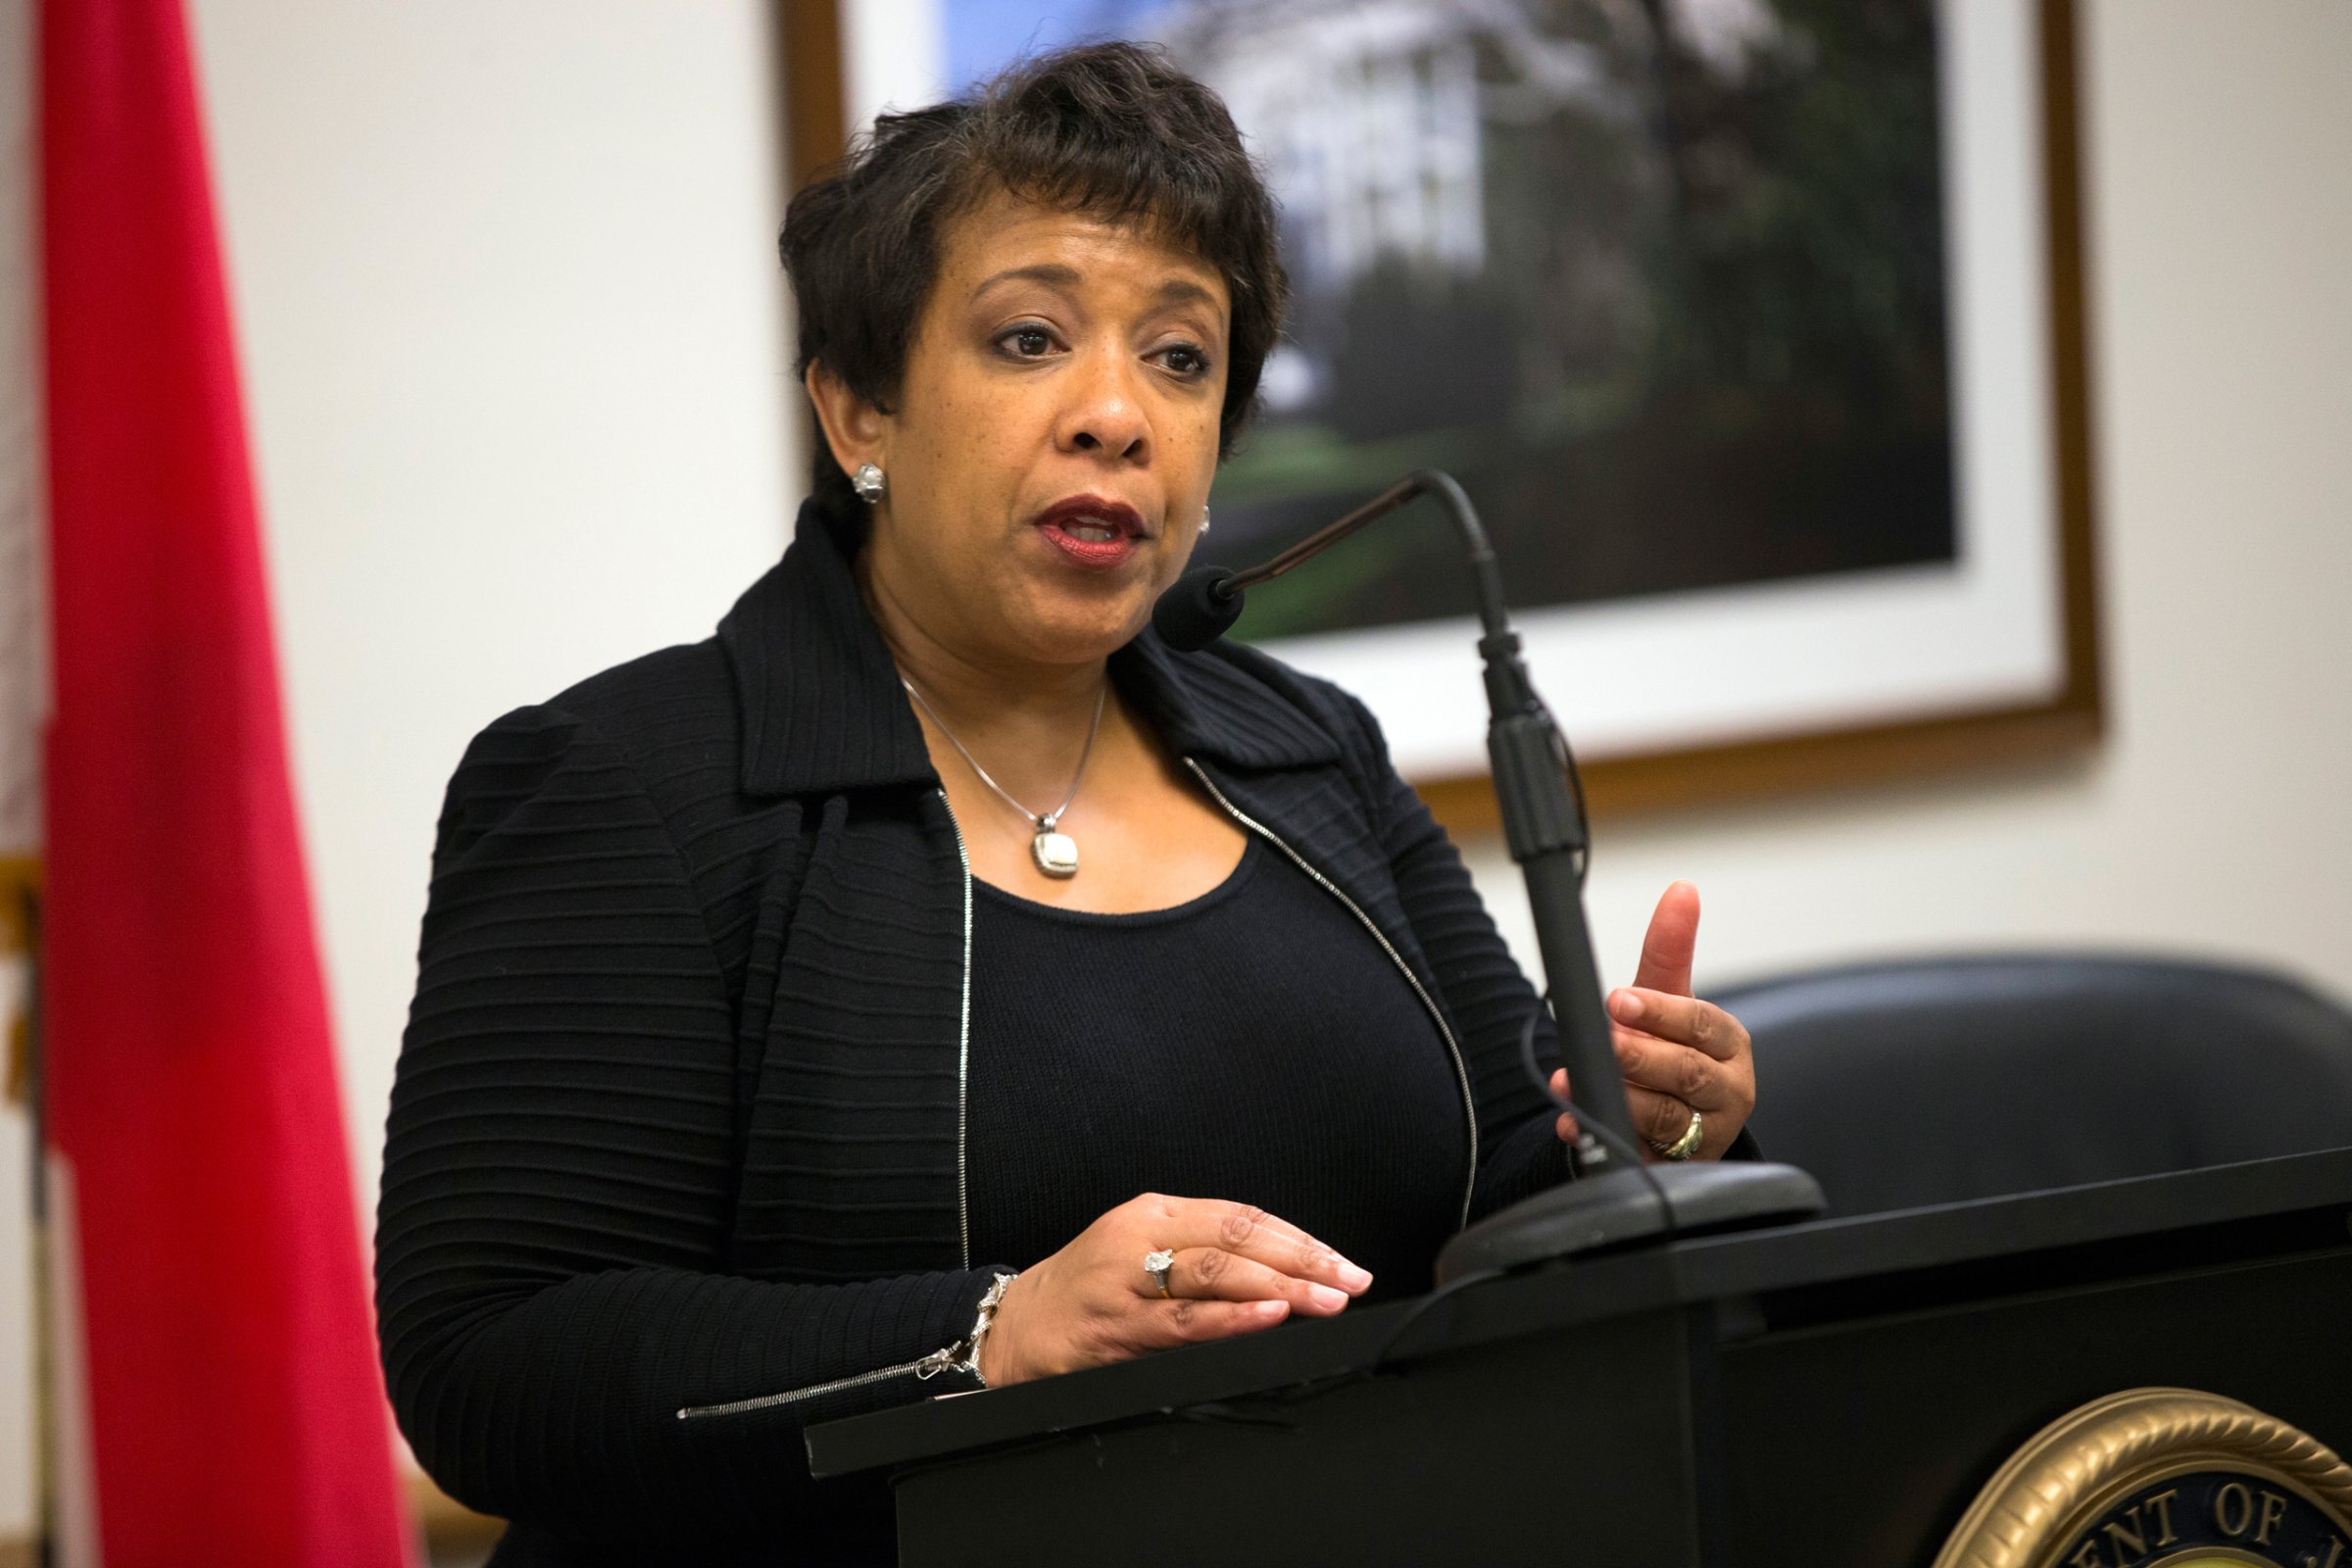 Attorney General Loretta Lynch speaks during an event to highlight policies that aim to reduce barriers for formerly incarcerated individuals, on Friday, April 29, 2016, in Mobile, Ala. (AP Photo/Evan Vucci)